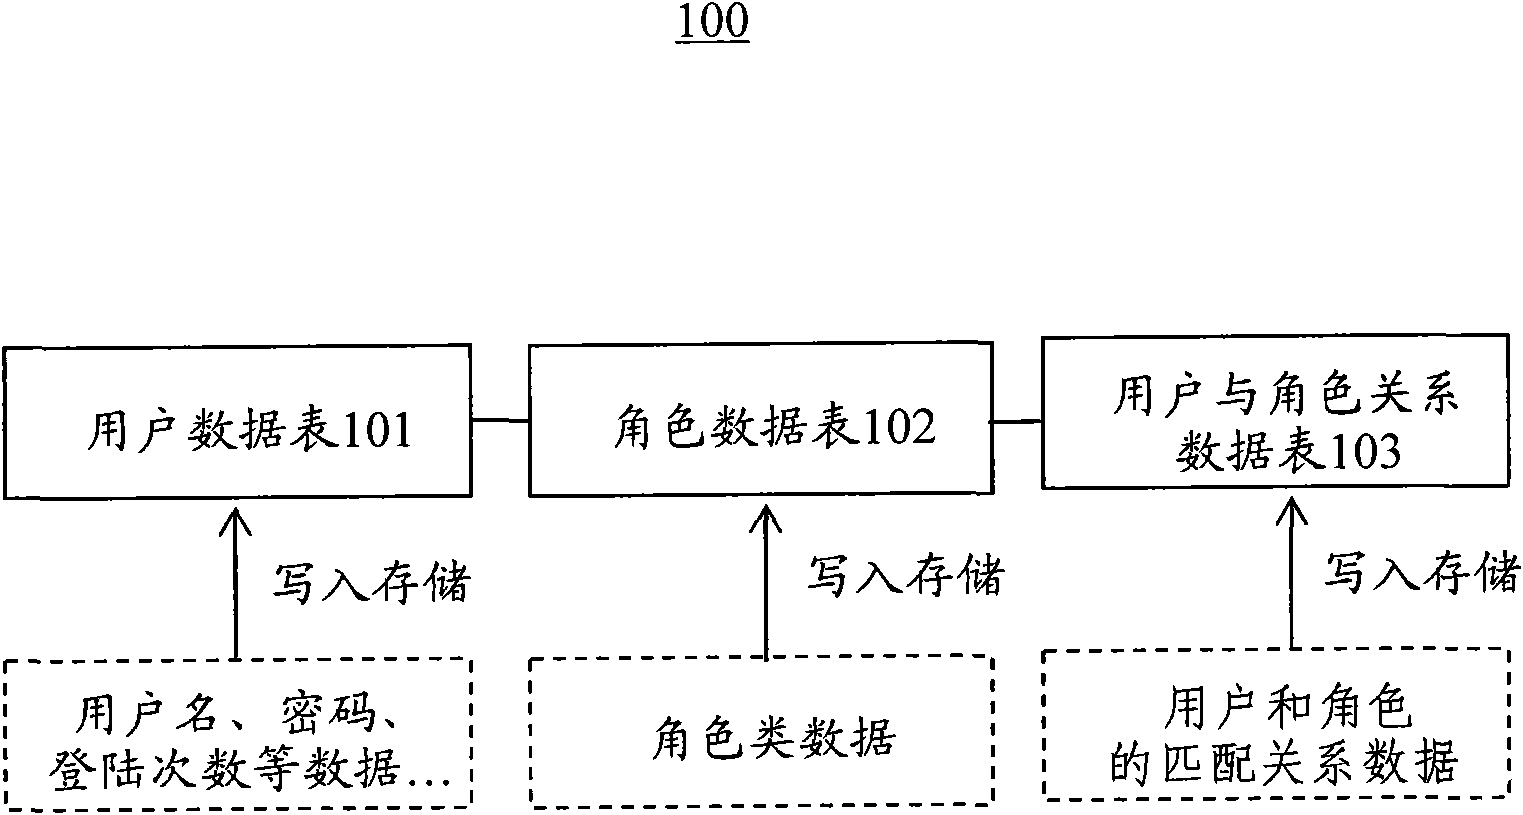 Role access control-based information system data storage layer and building method